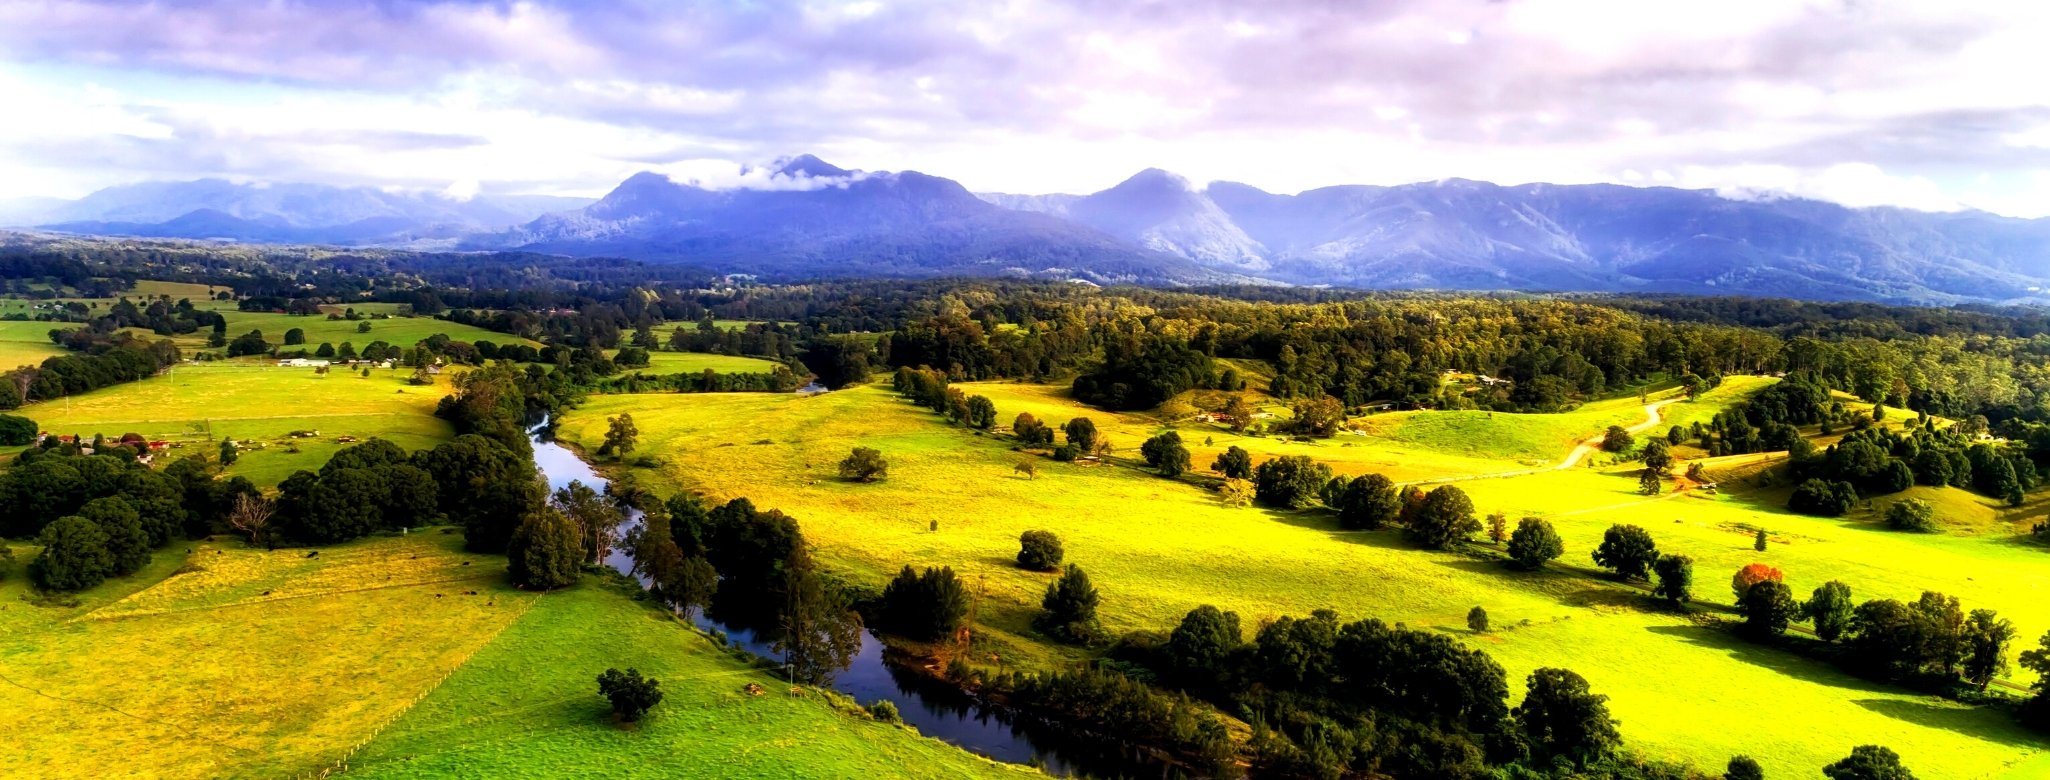 View from Fernmount, Bellingen Shire, New South Wales